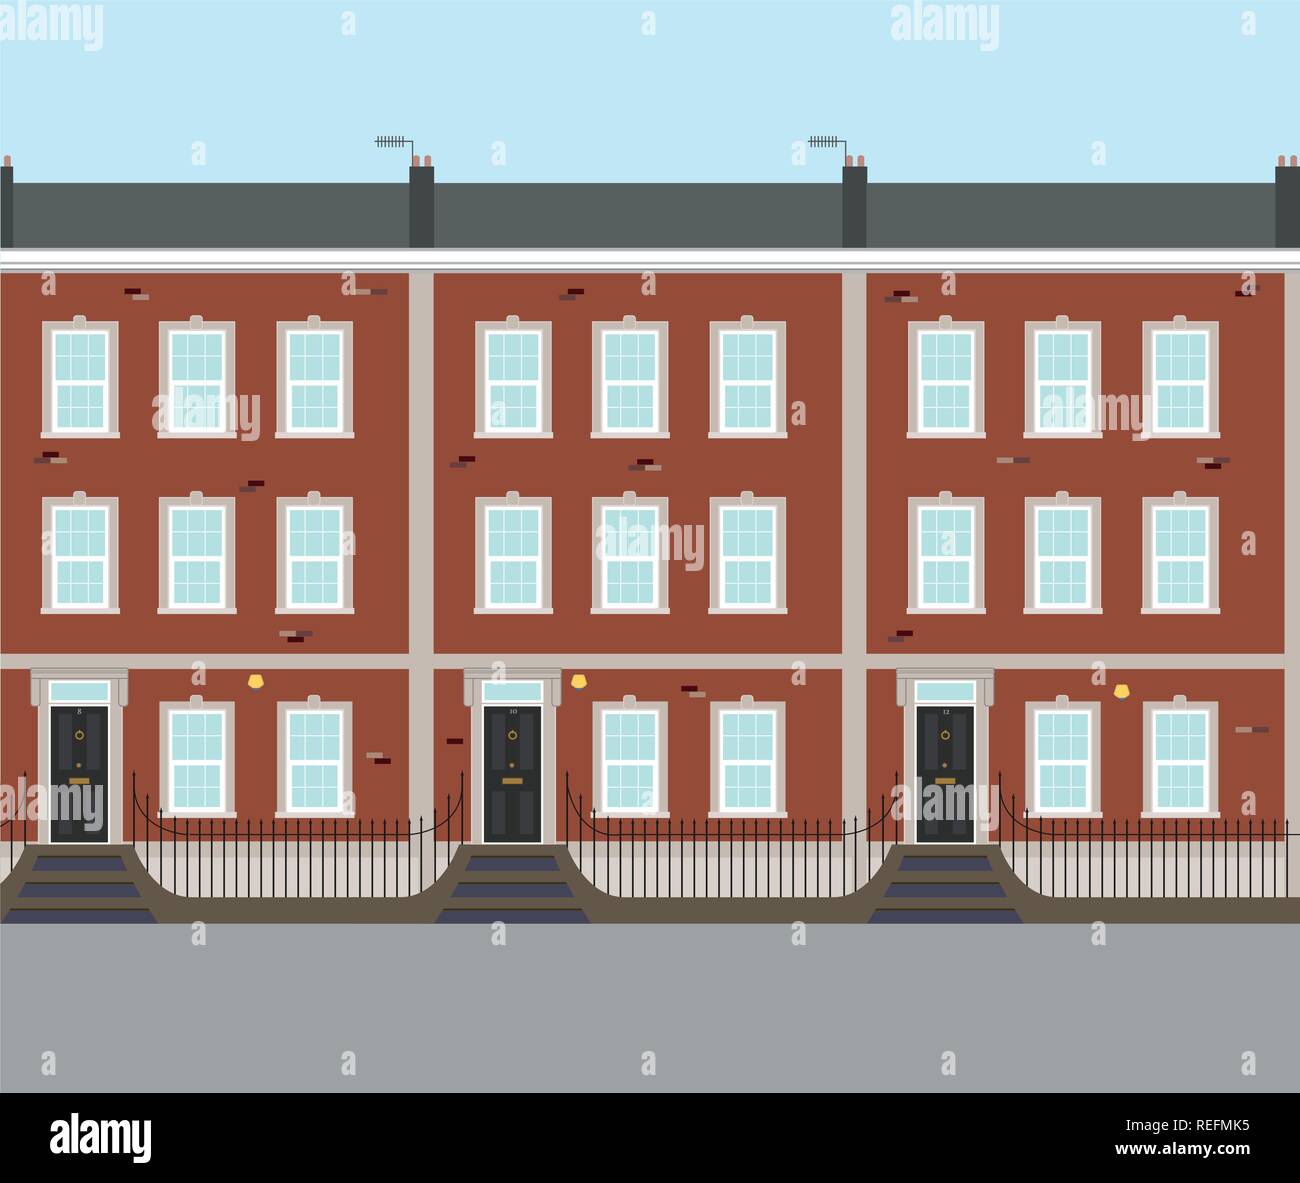 Typical UK Terrace Houses Brick Four Storey Georgian Style Terraced Home Property Vector Stock Vector